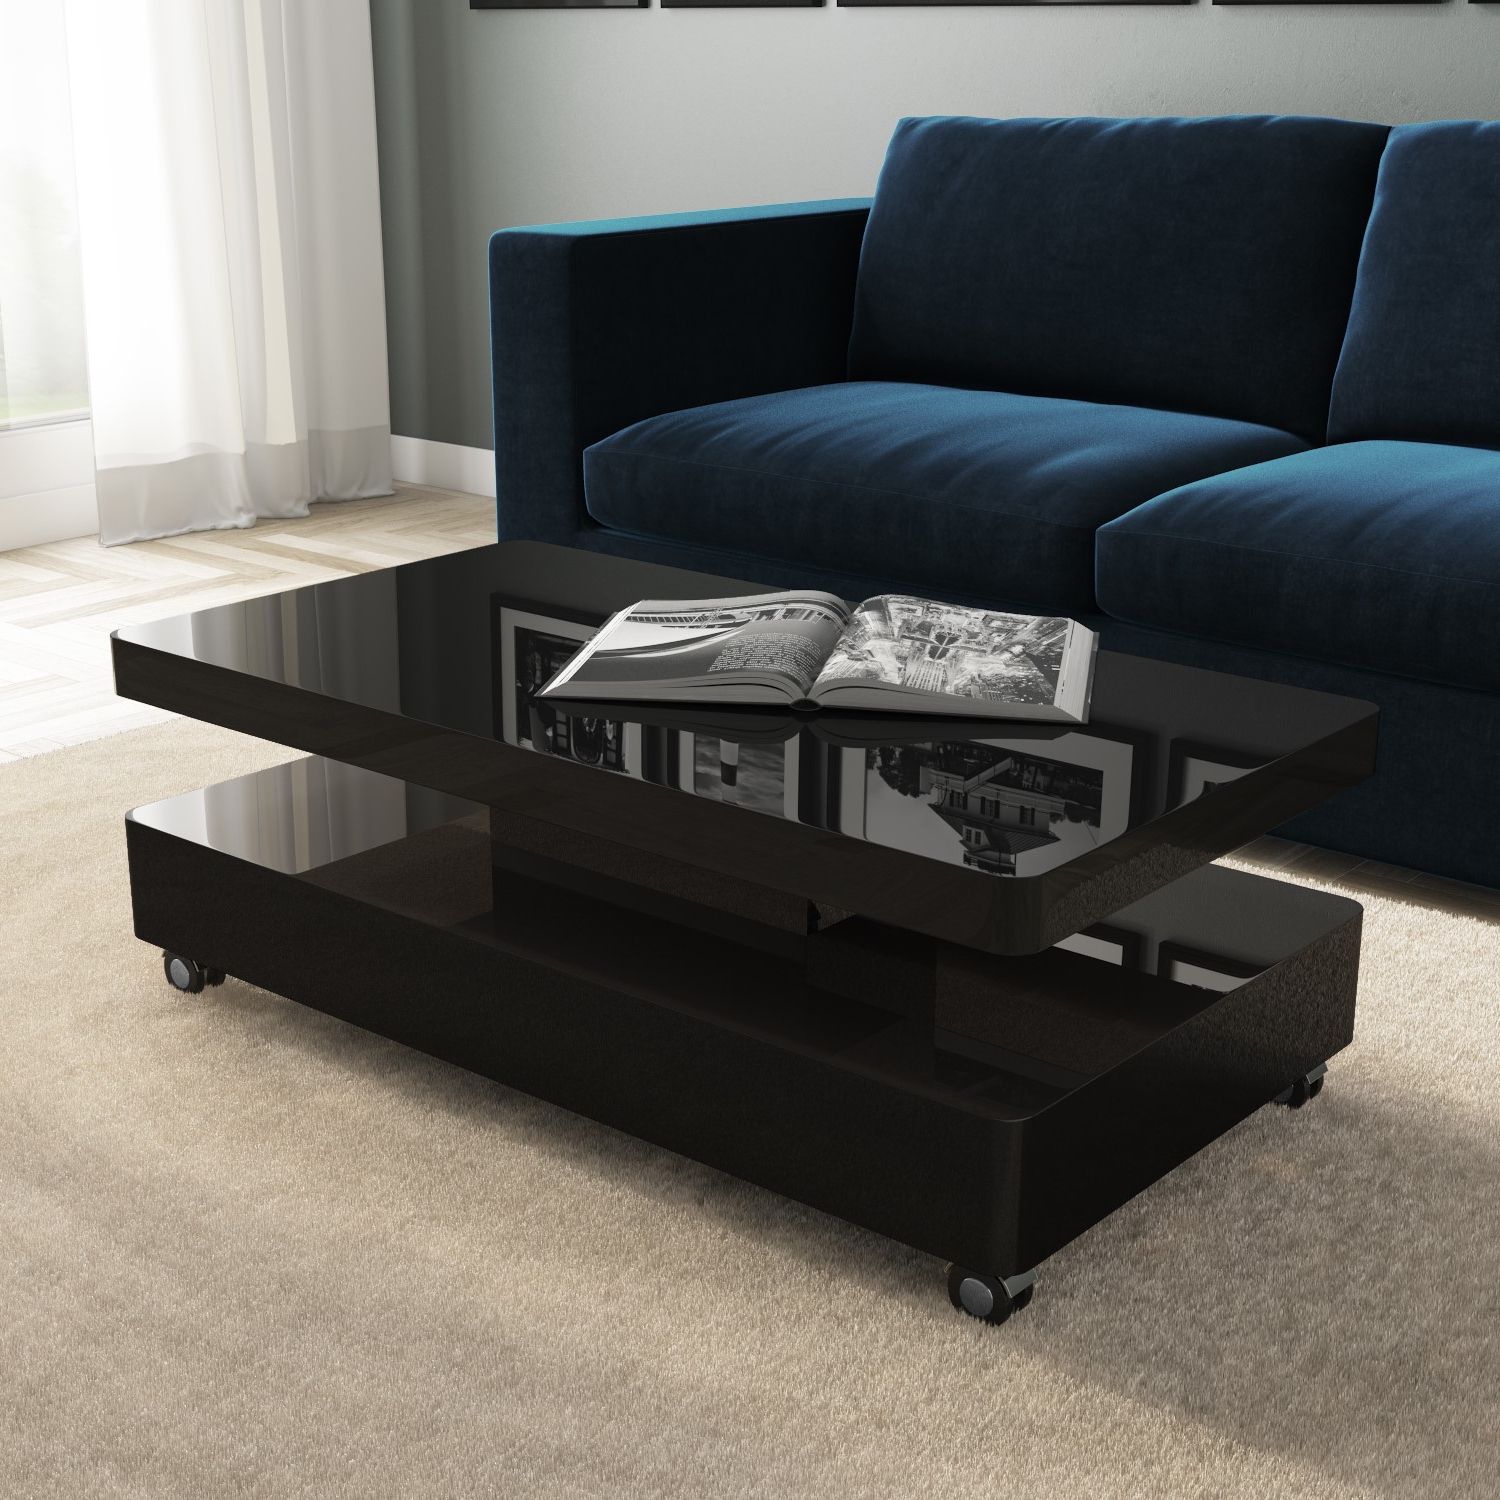 Large Rectangular Black Gloss Led Coffee Table – Tiffany – Furniture123 Throughout Famous Rectangular Led Coffee Tables (View 3 of 15)